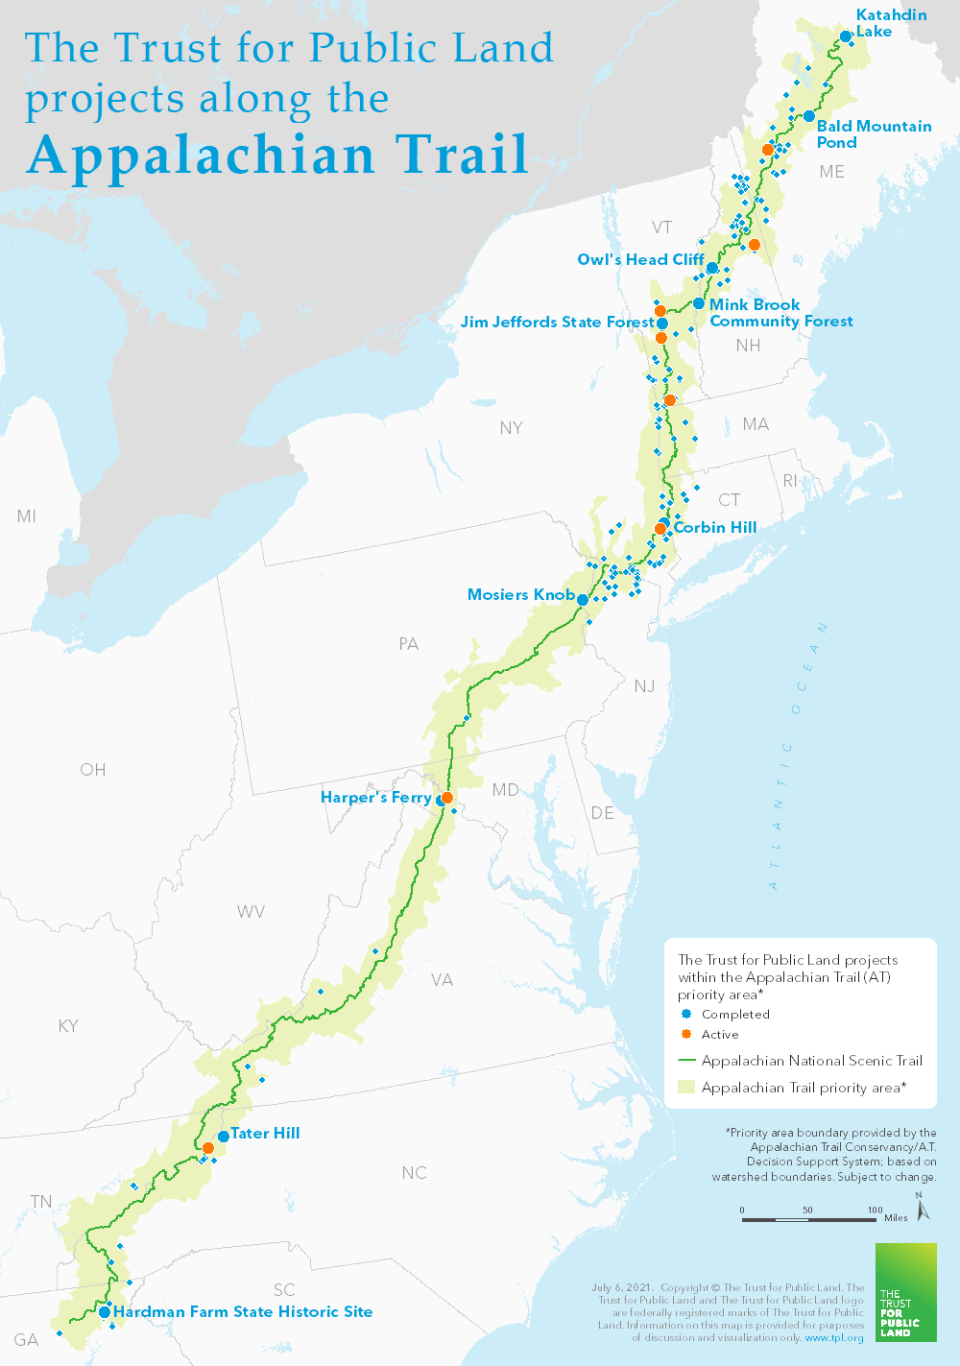 A map of places along the Appalachian Trail protected by The Trust for Public Land